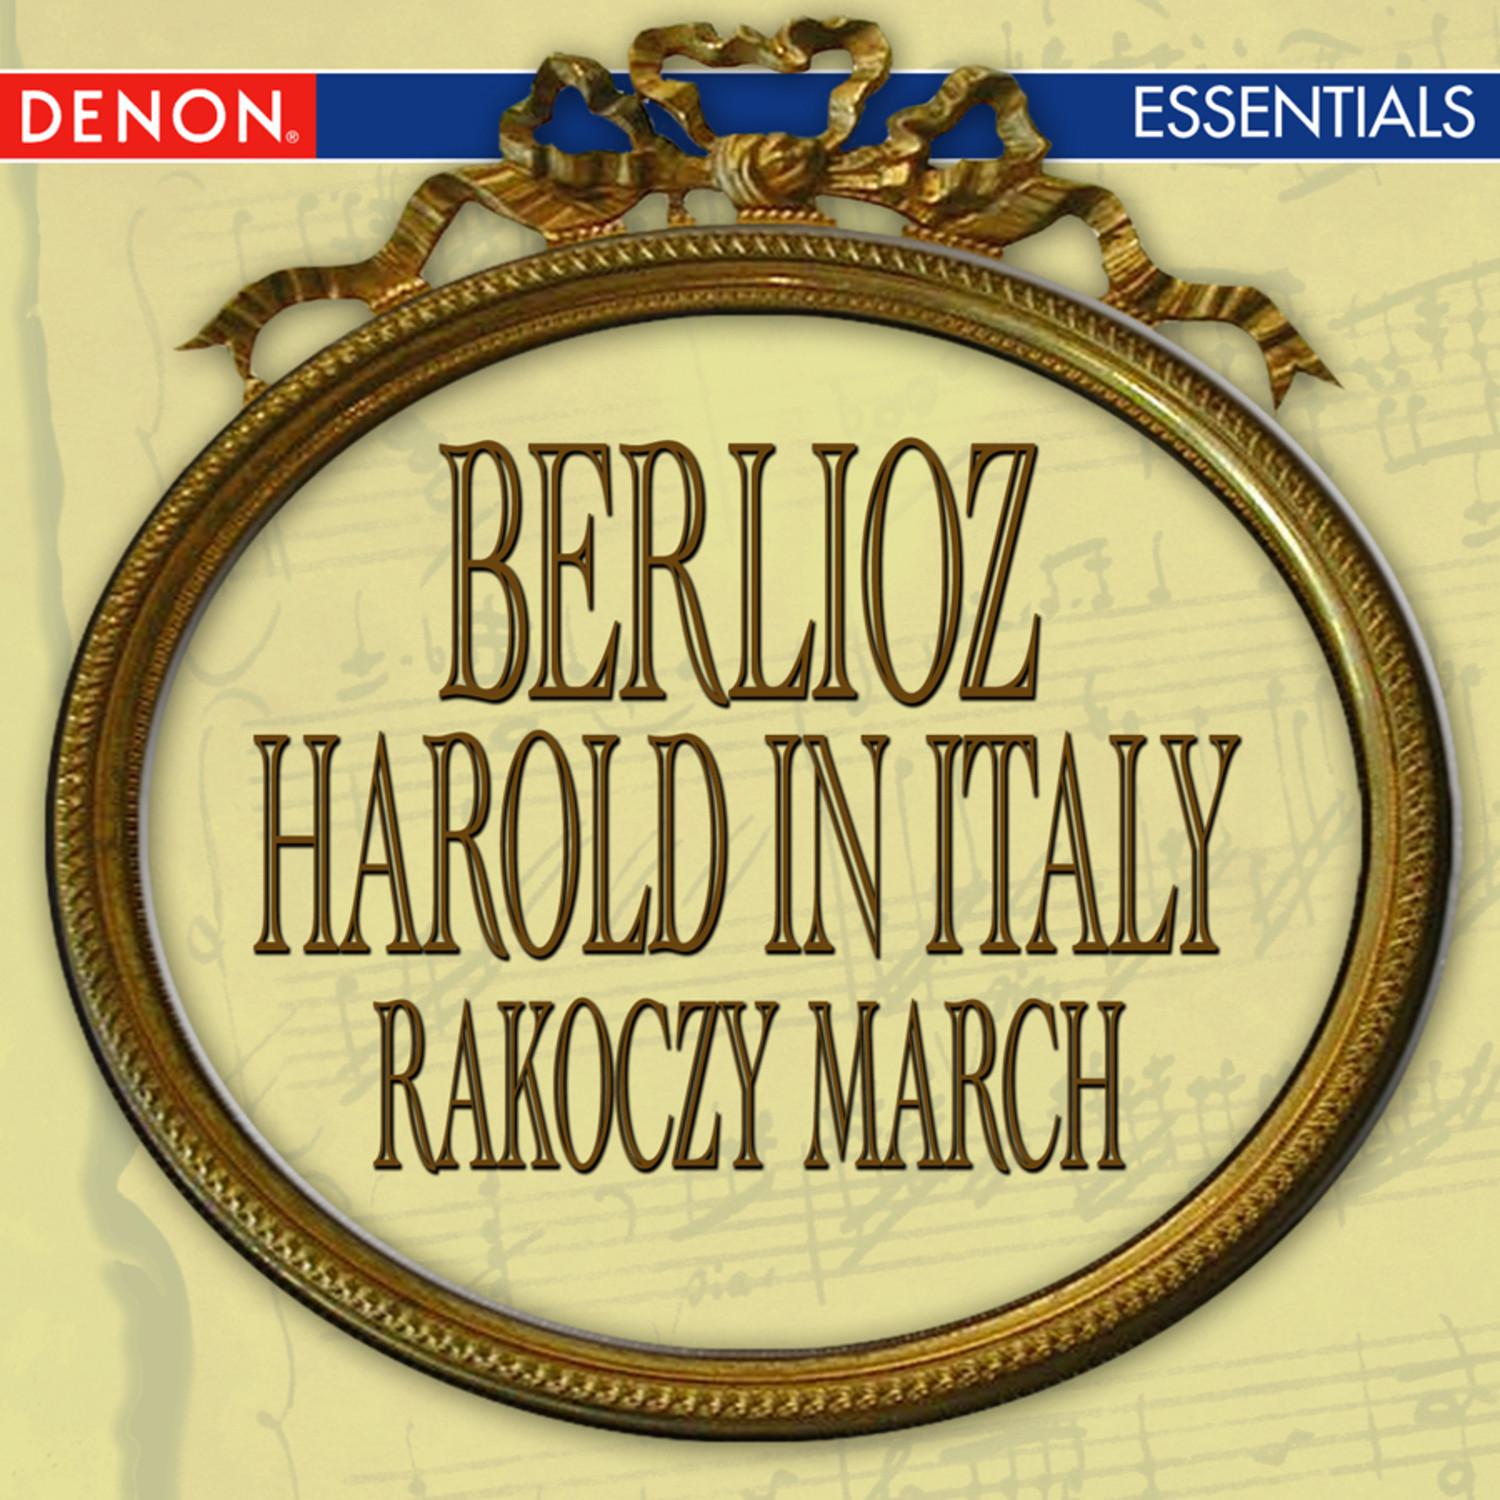 Harold in Italy Symphony for Viola & Orchestra: III. Serenade of an Abruzzian Highlander - Allegro assai